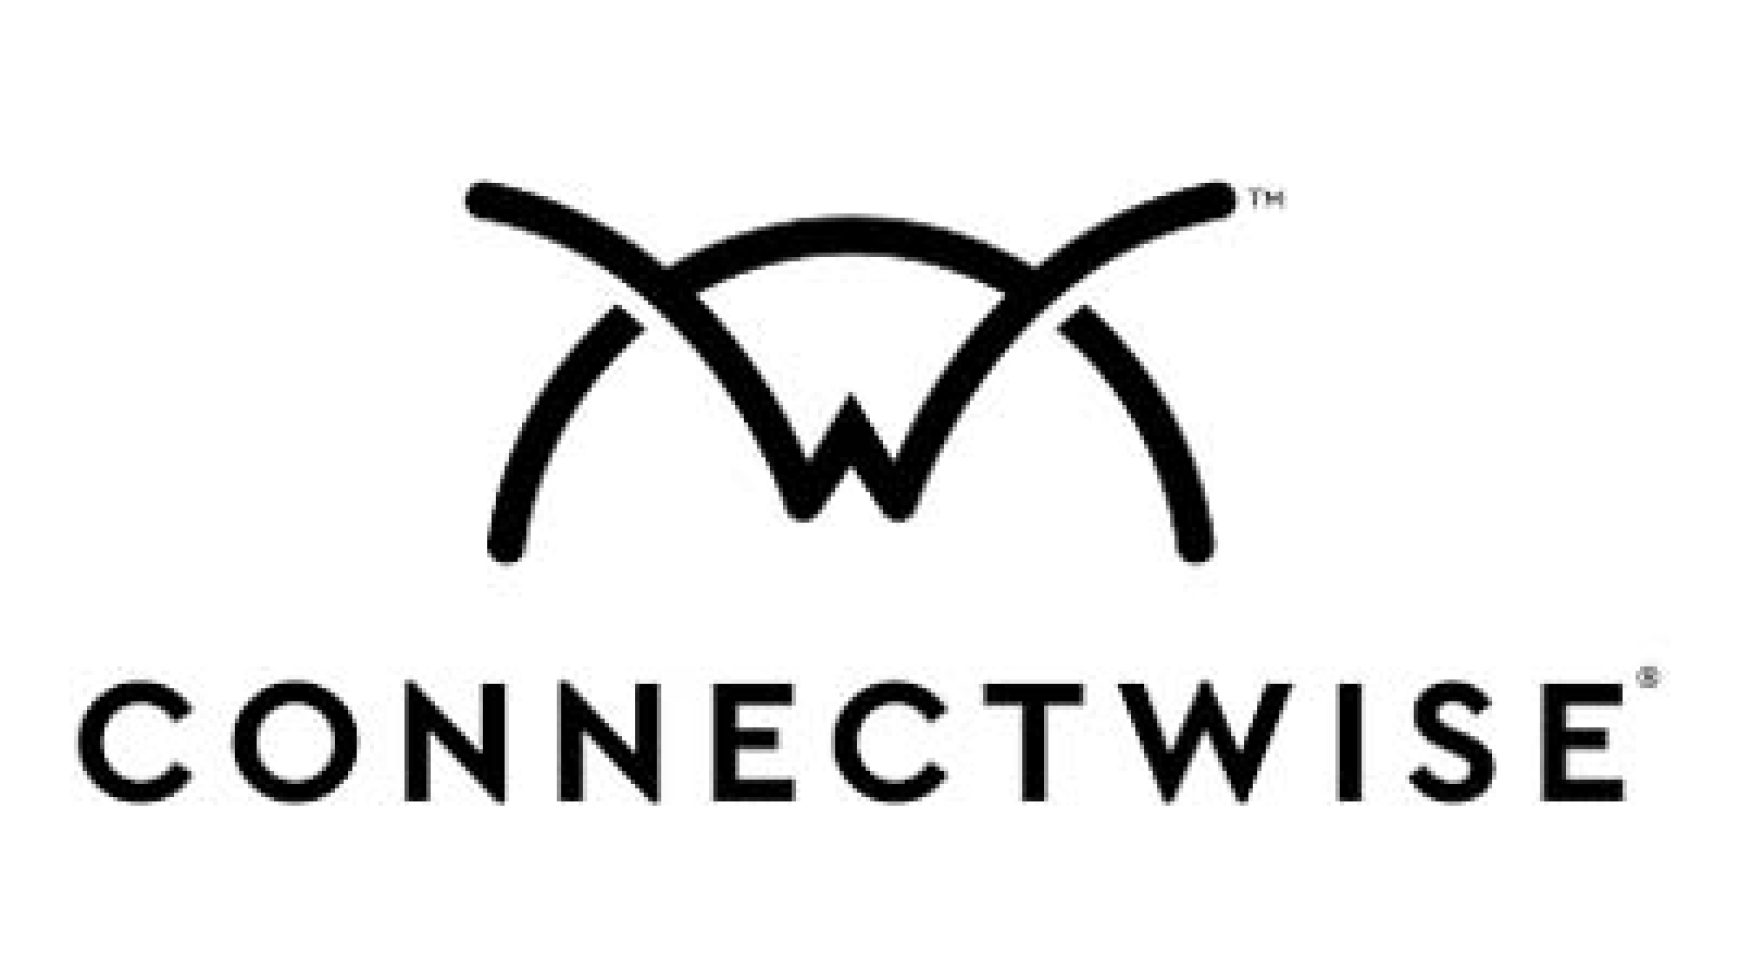 CONNECTWISE